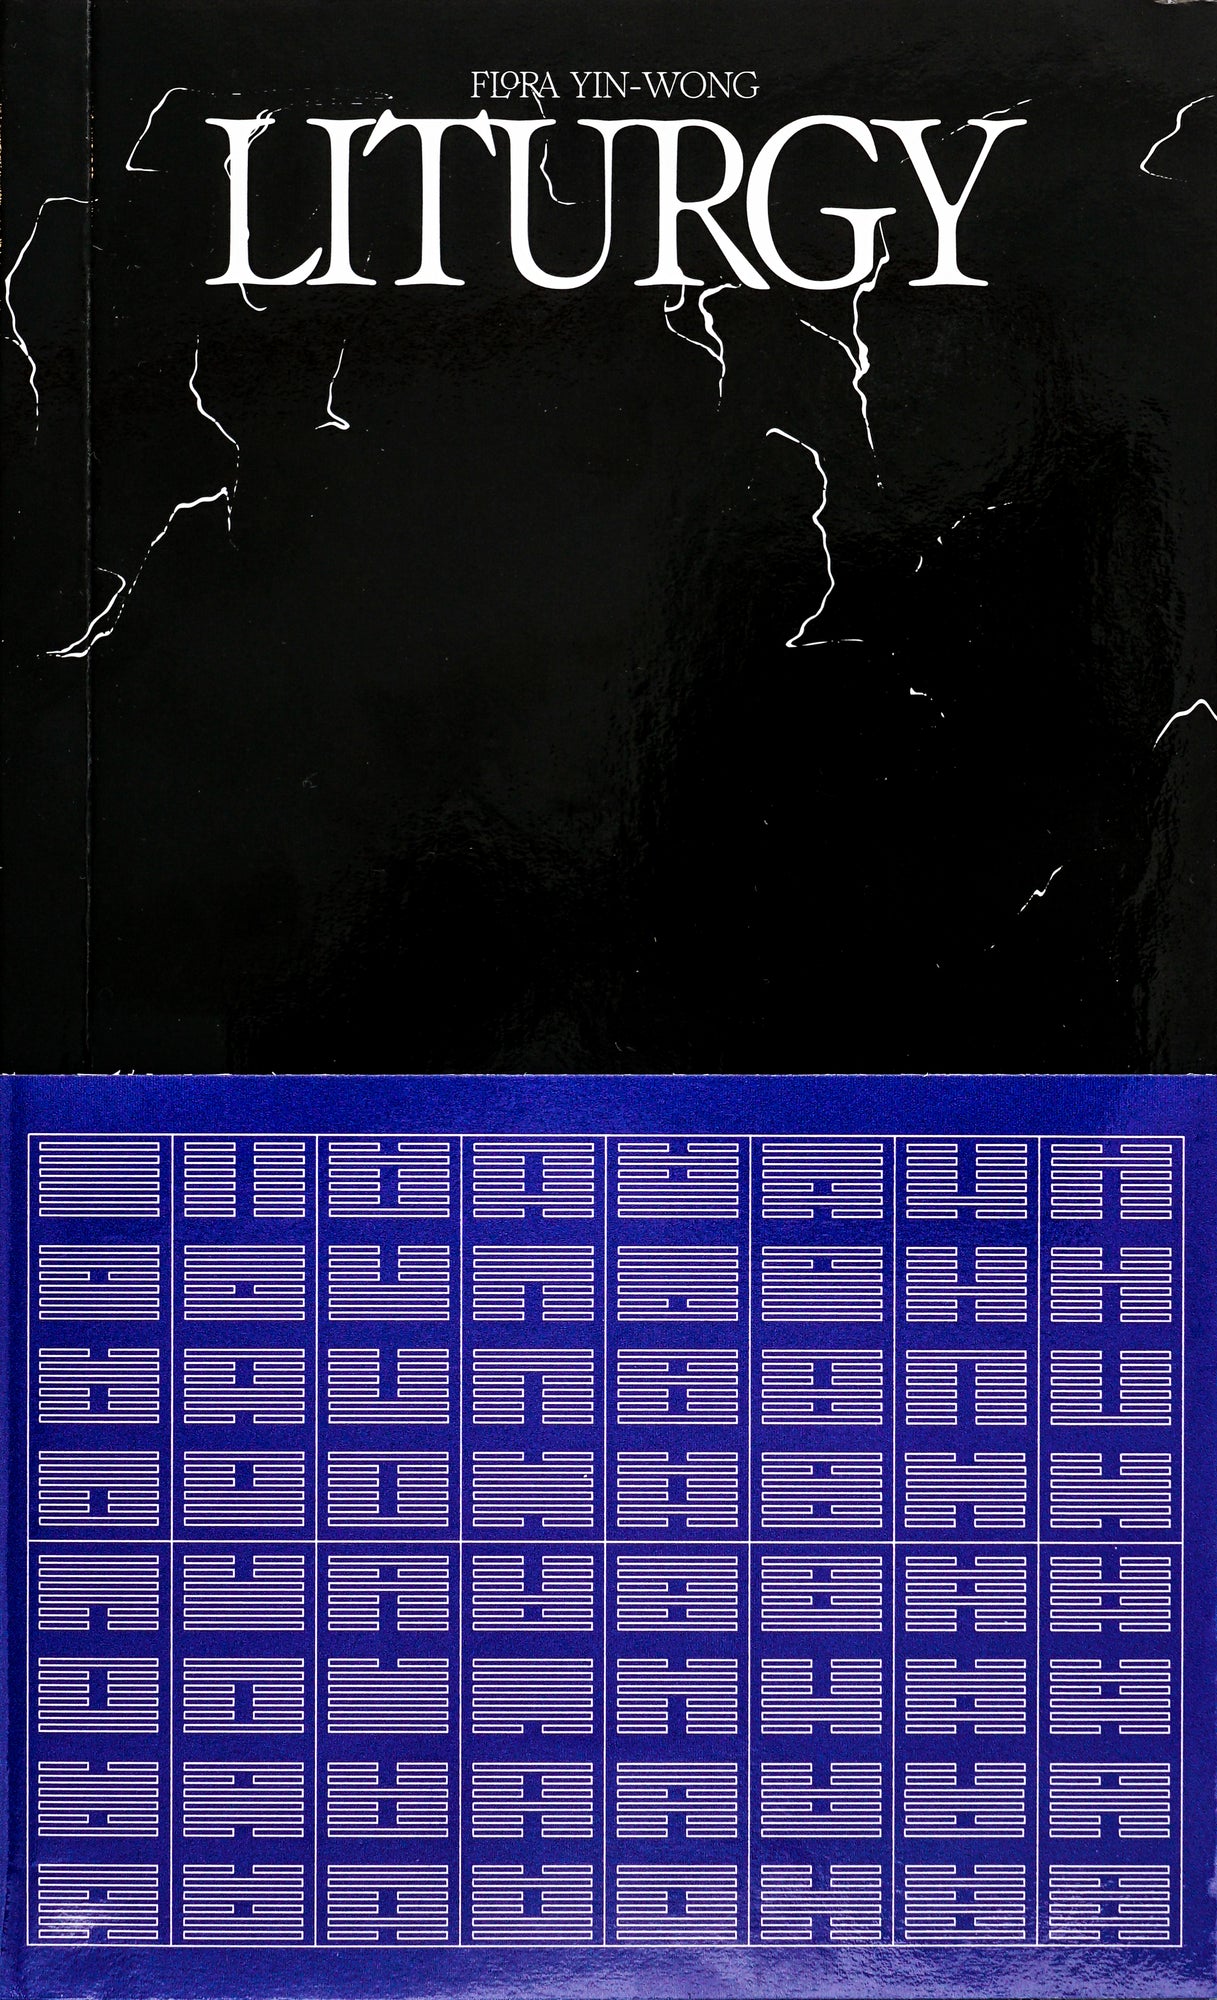 Book Cover with the upper half in monochrome black with white cracks and the title Liturgy in white serif writing. Above it the author Flore Yin-Wong in small white serif writing. The lower half of the page is covered in a Yves Klein Blue abstract grid consisting of lines, dots, boxes.